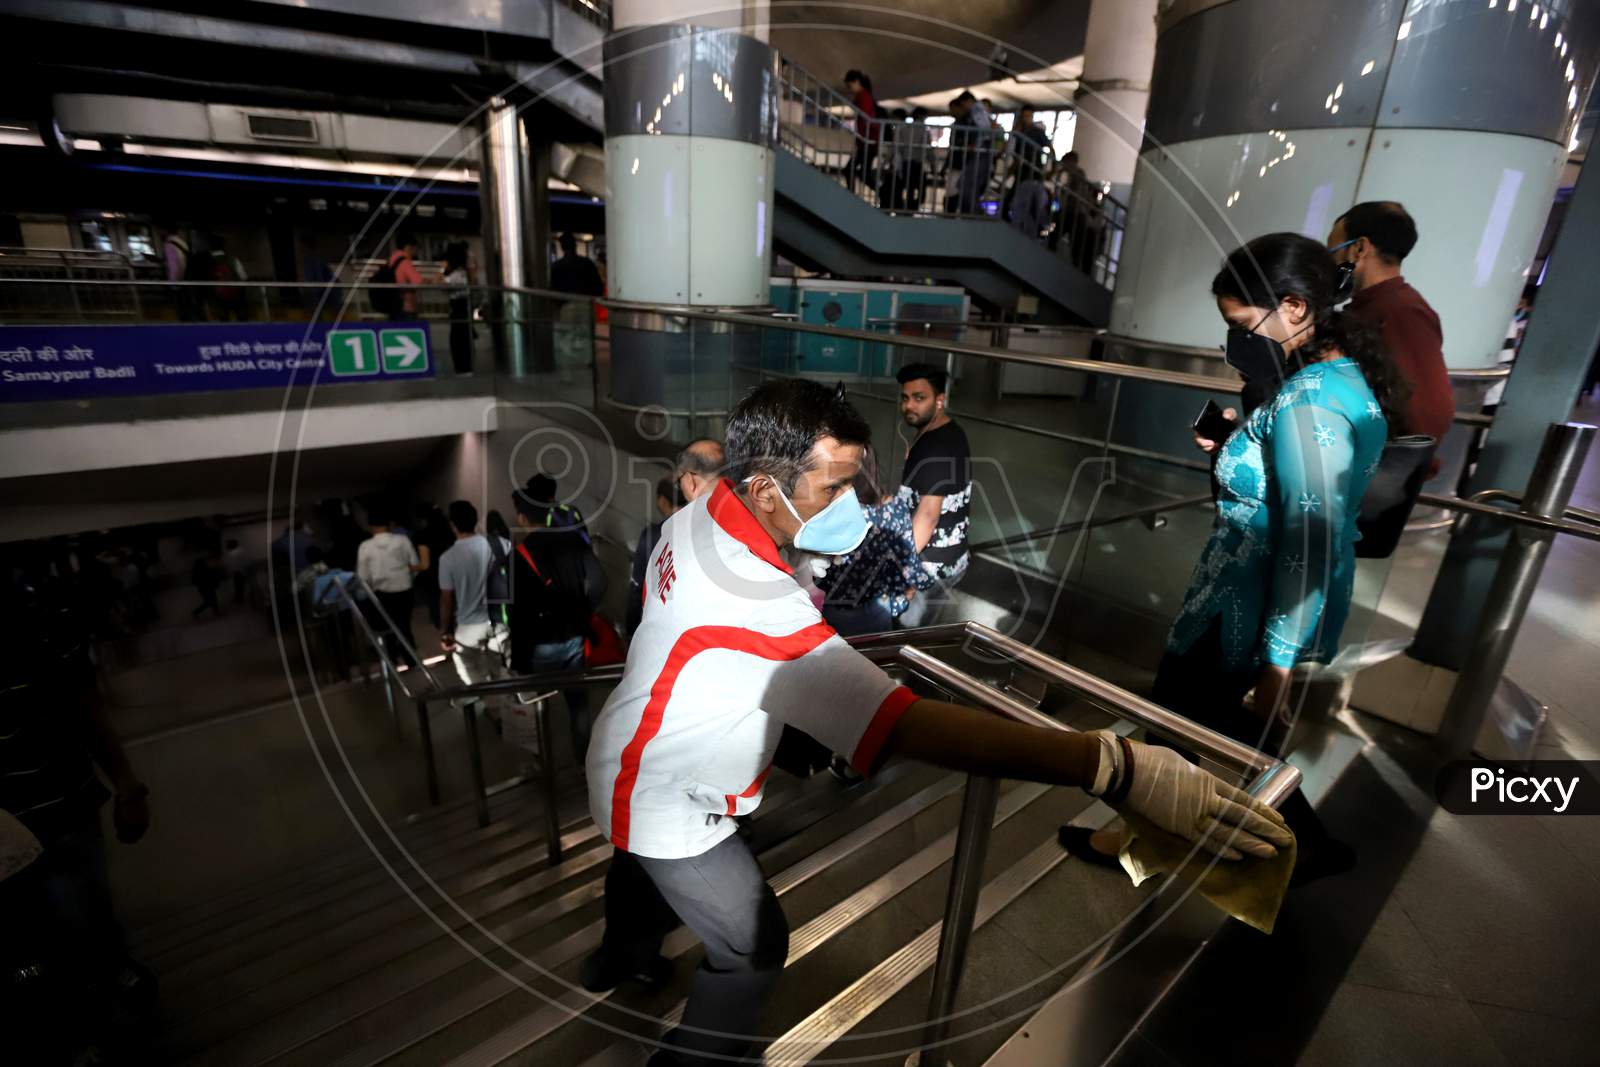 Delhi Metro Started Sanitation Drive As A Preventive Measure Against The Covid-19 Novel Coronavirus Walks Out Of A Metro Station In New Delhi On March 13, 2020.